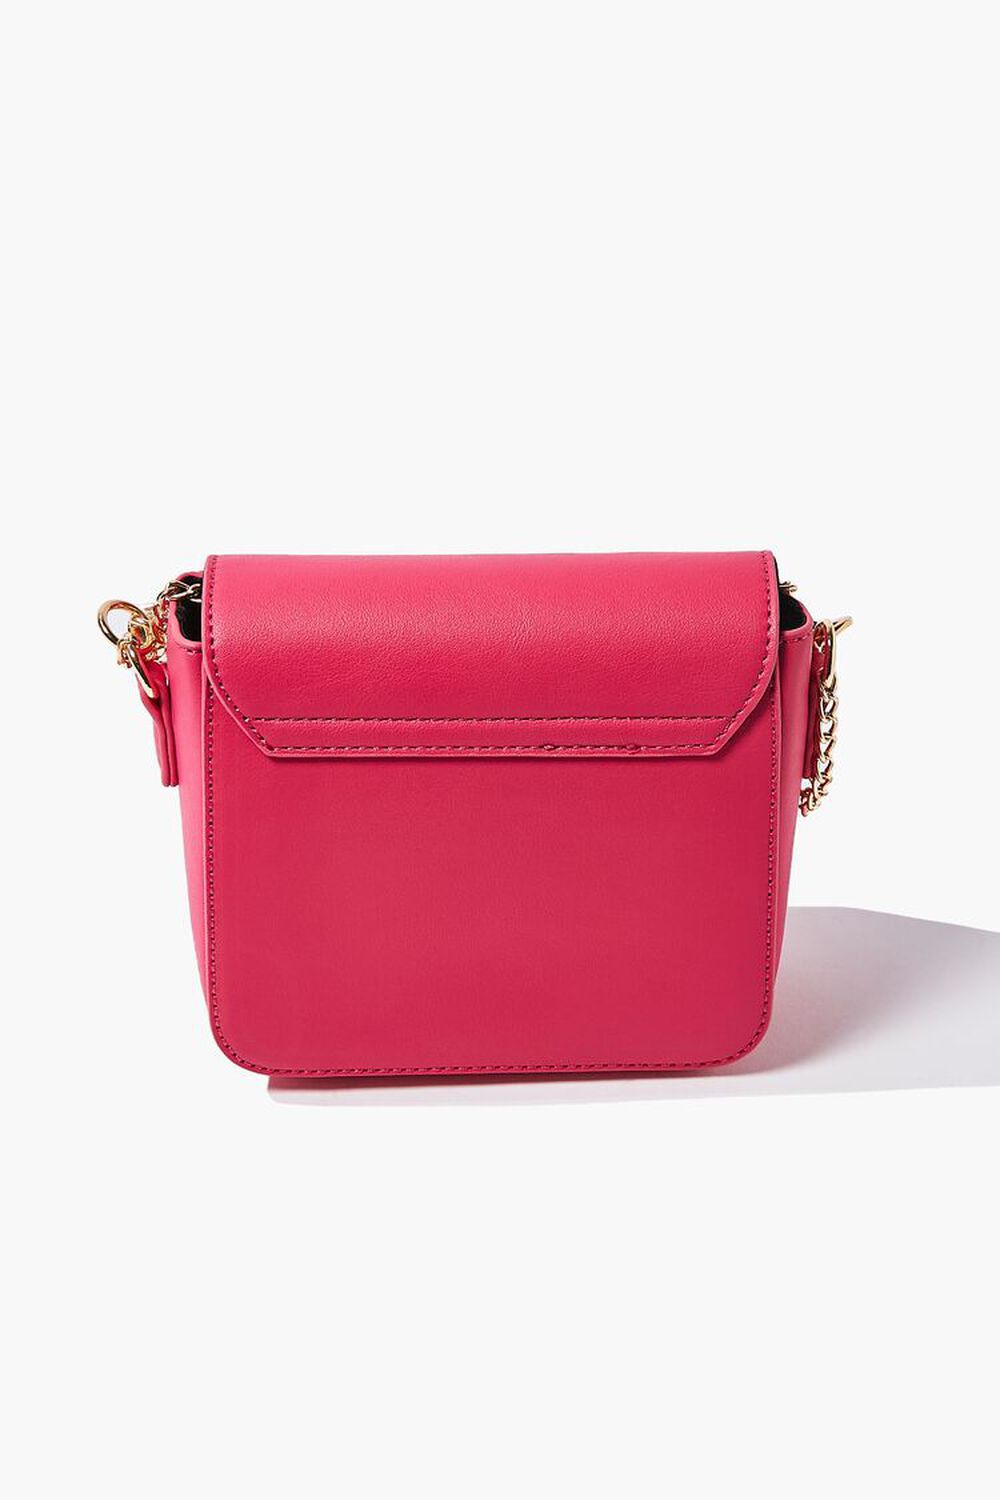 PINK Ruched Faux Leather Crossbody Bag, image 3